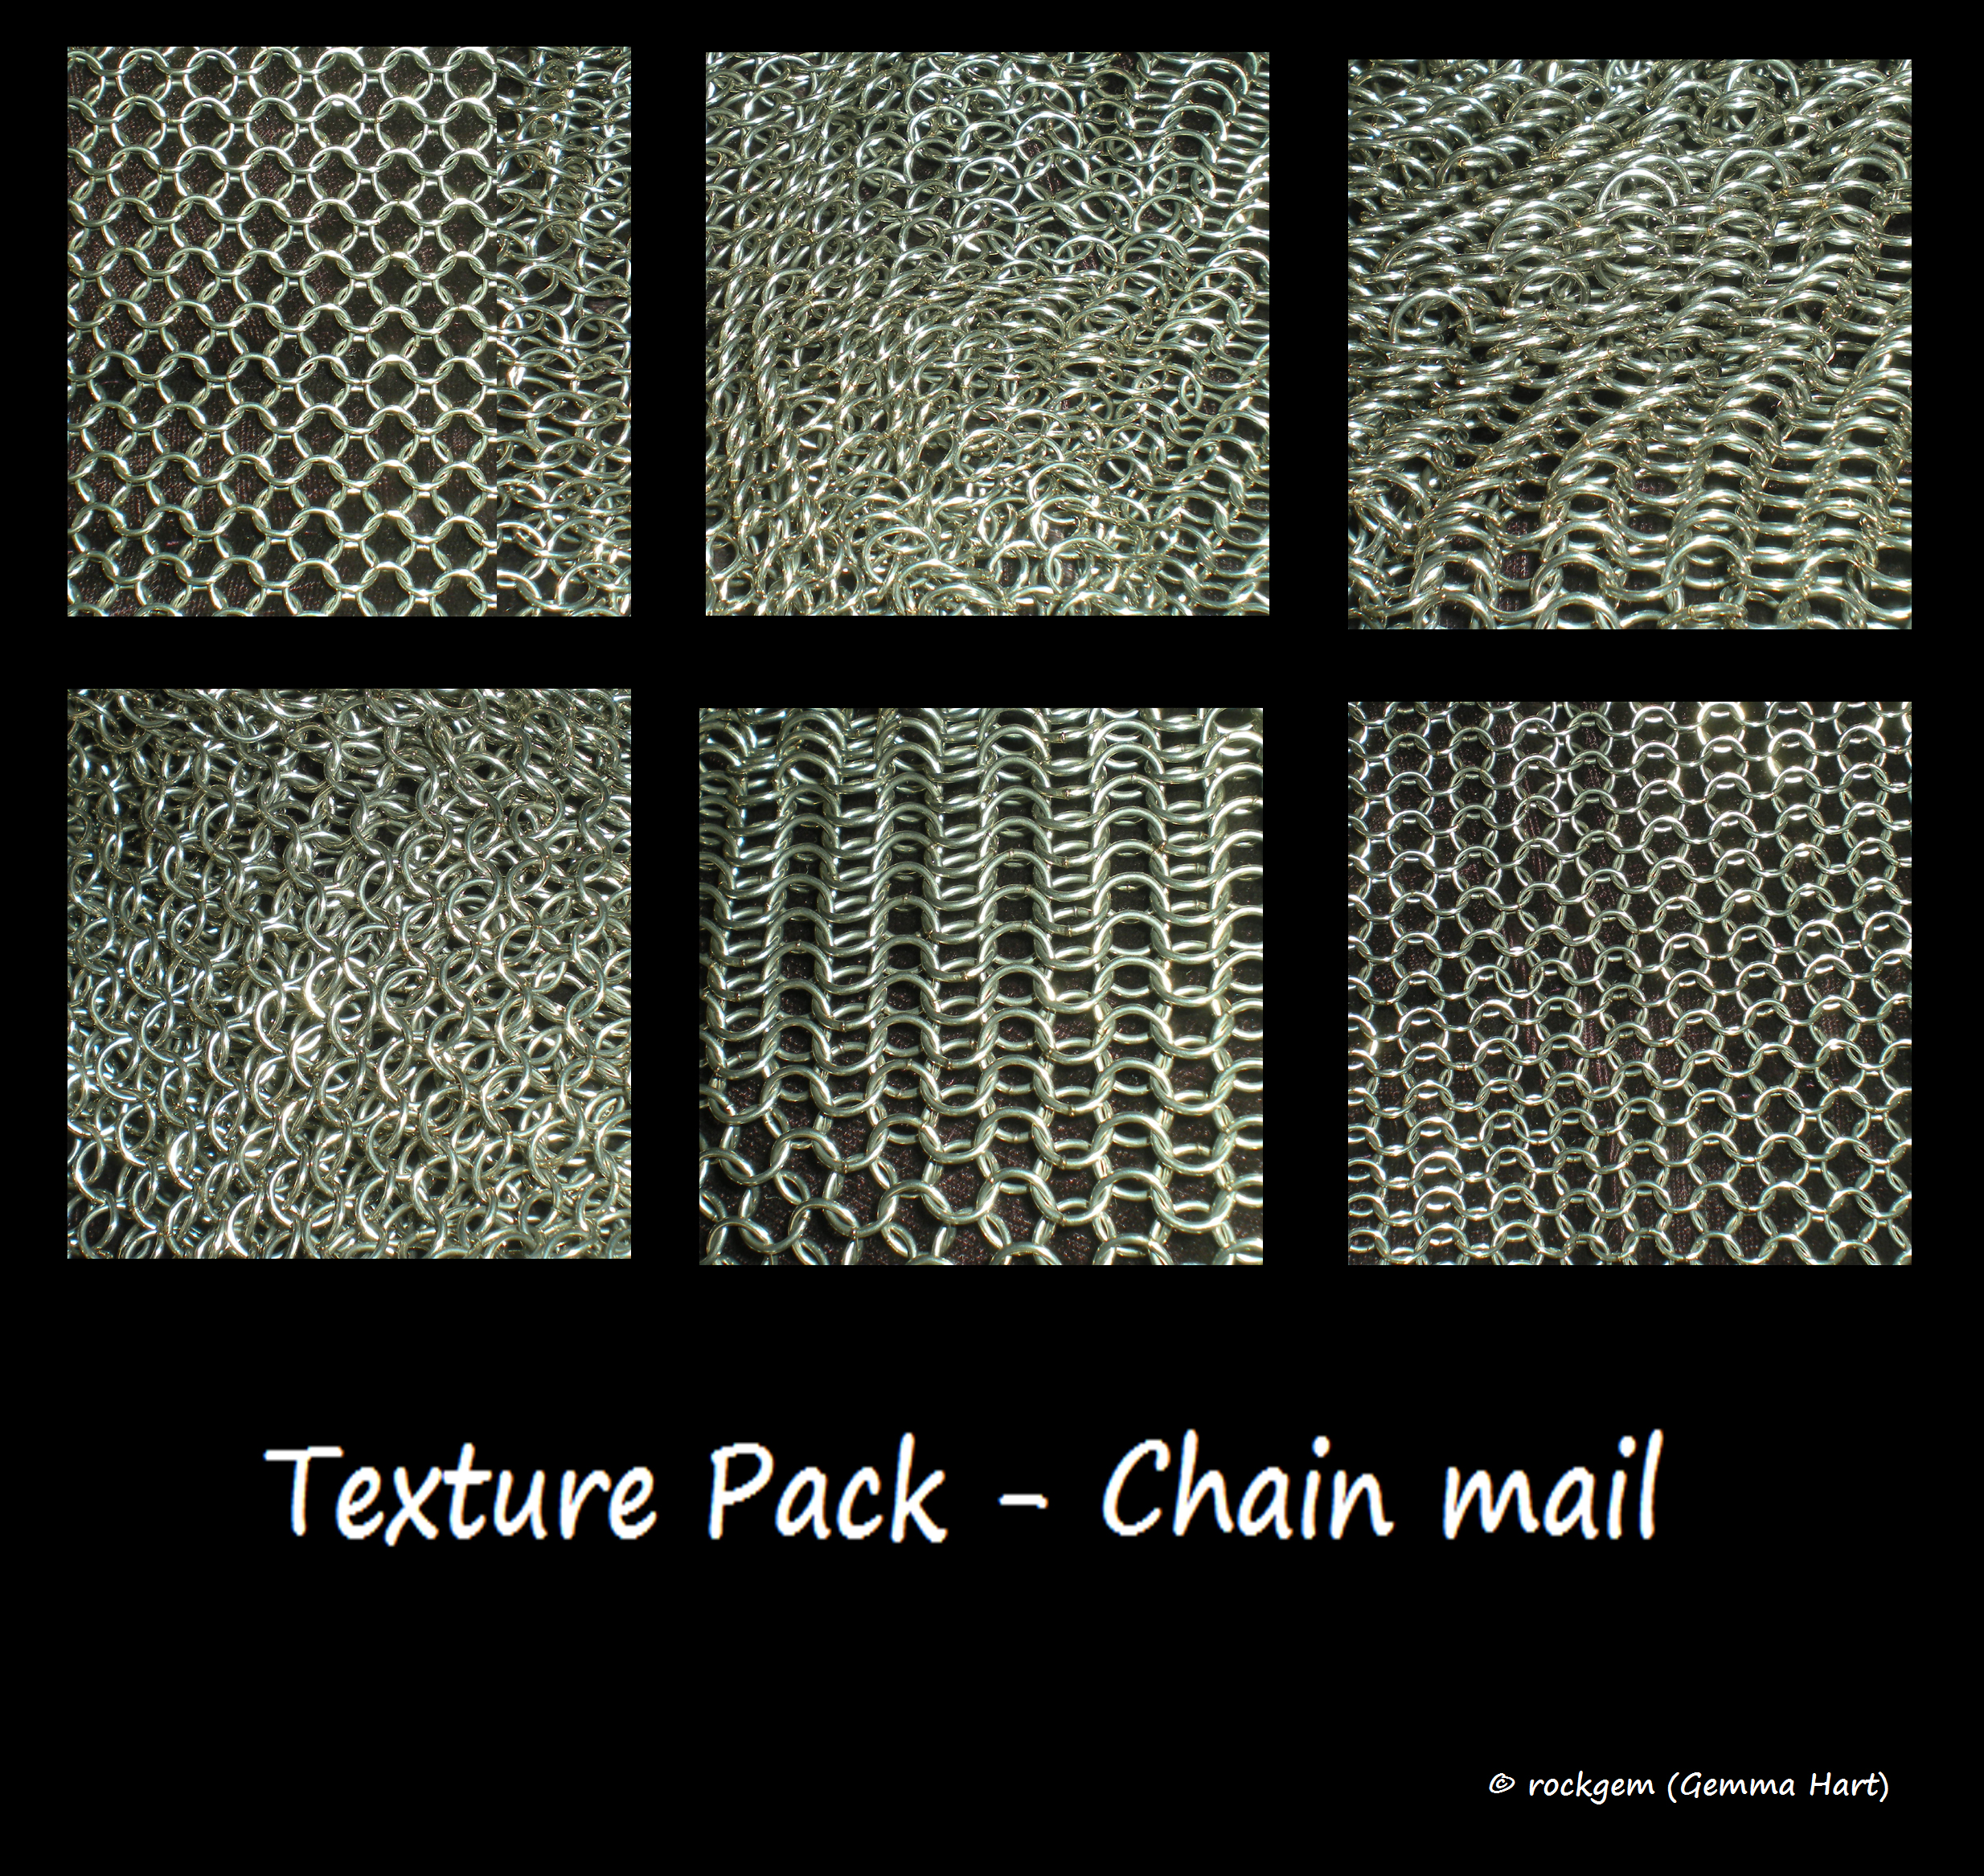 Texture Pack - Chainmail